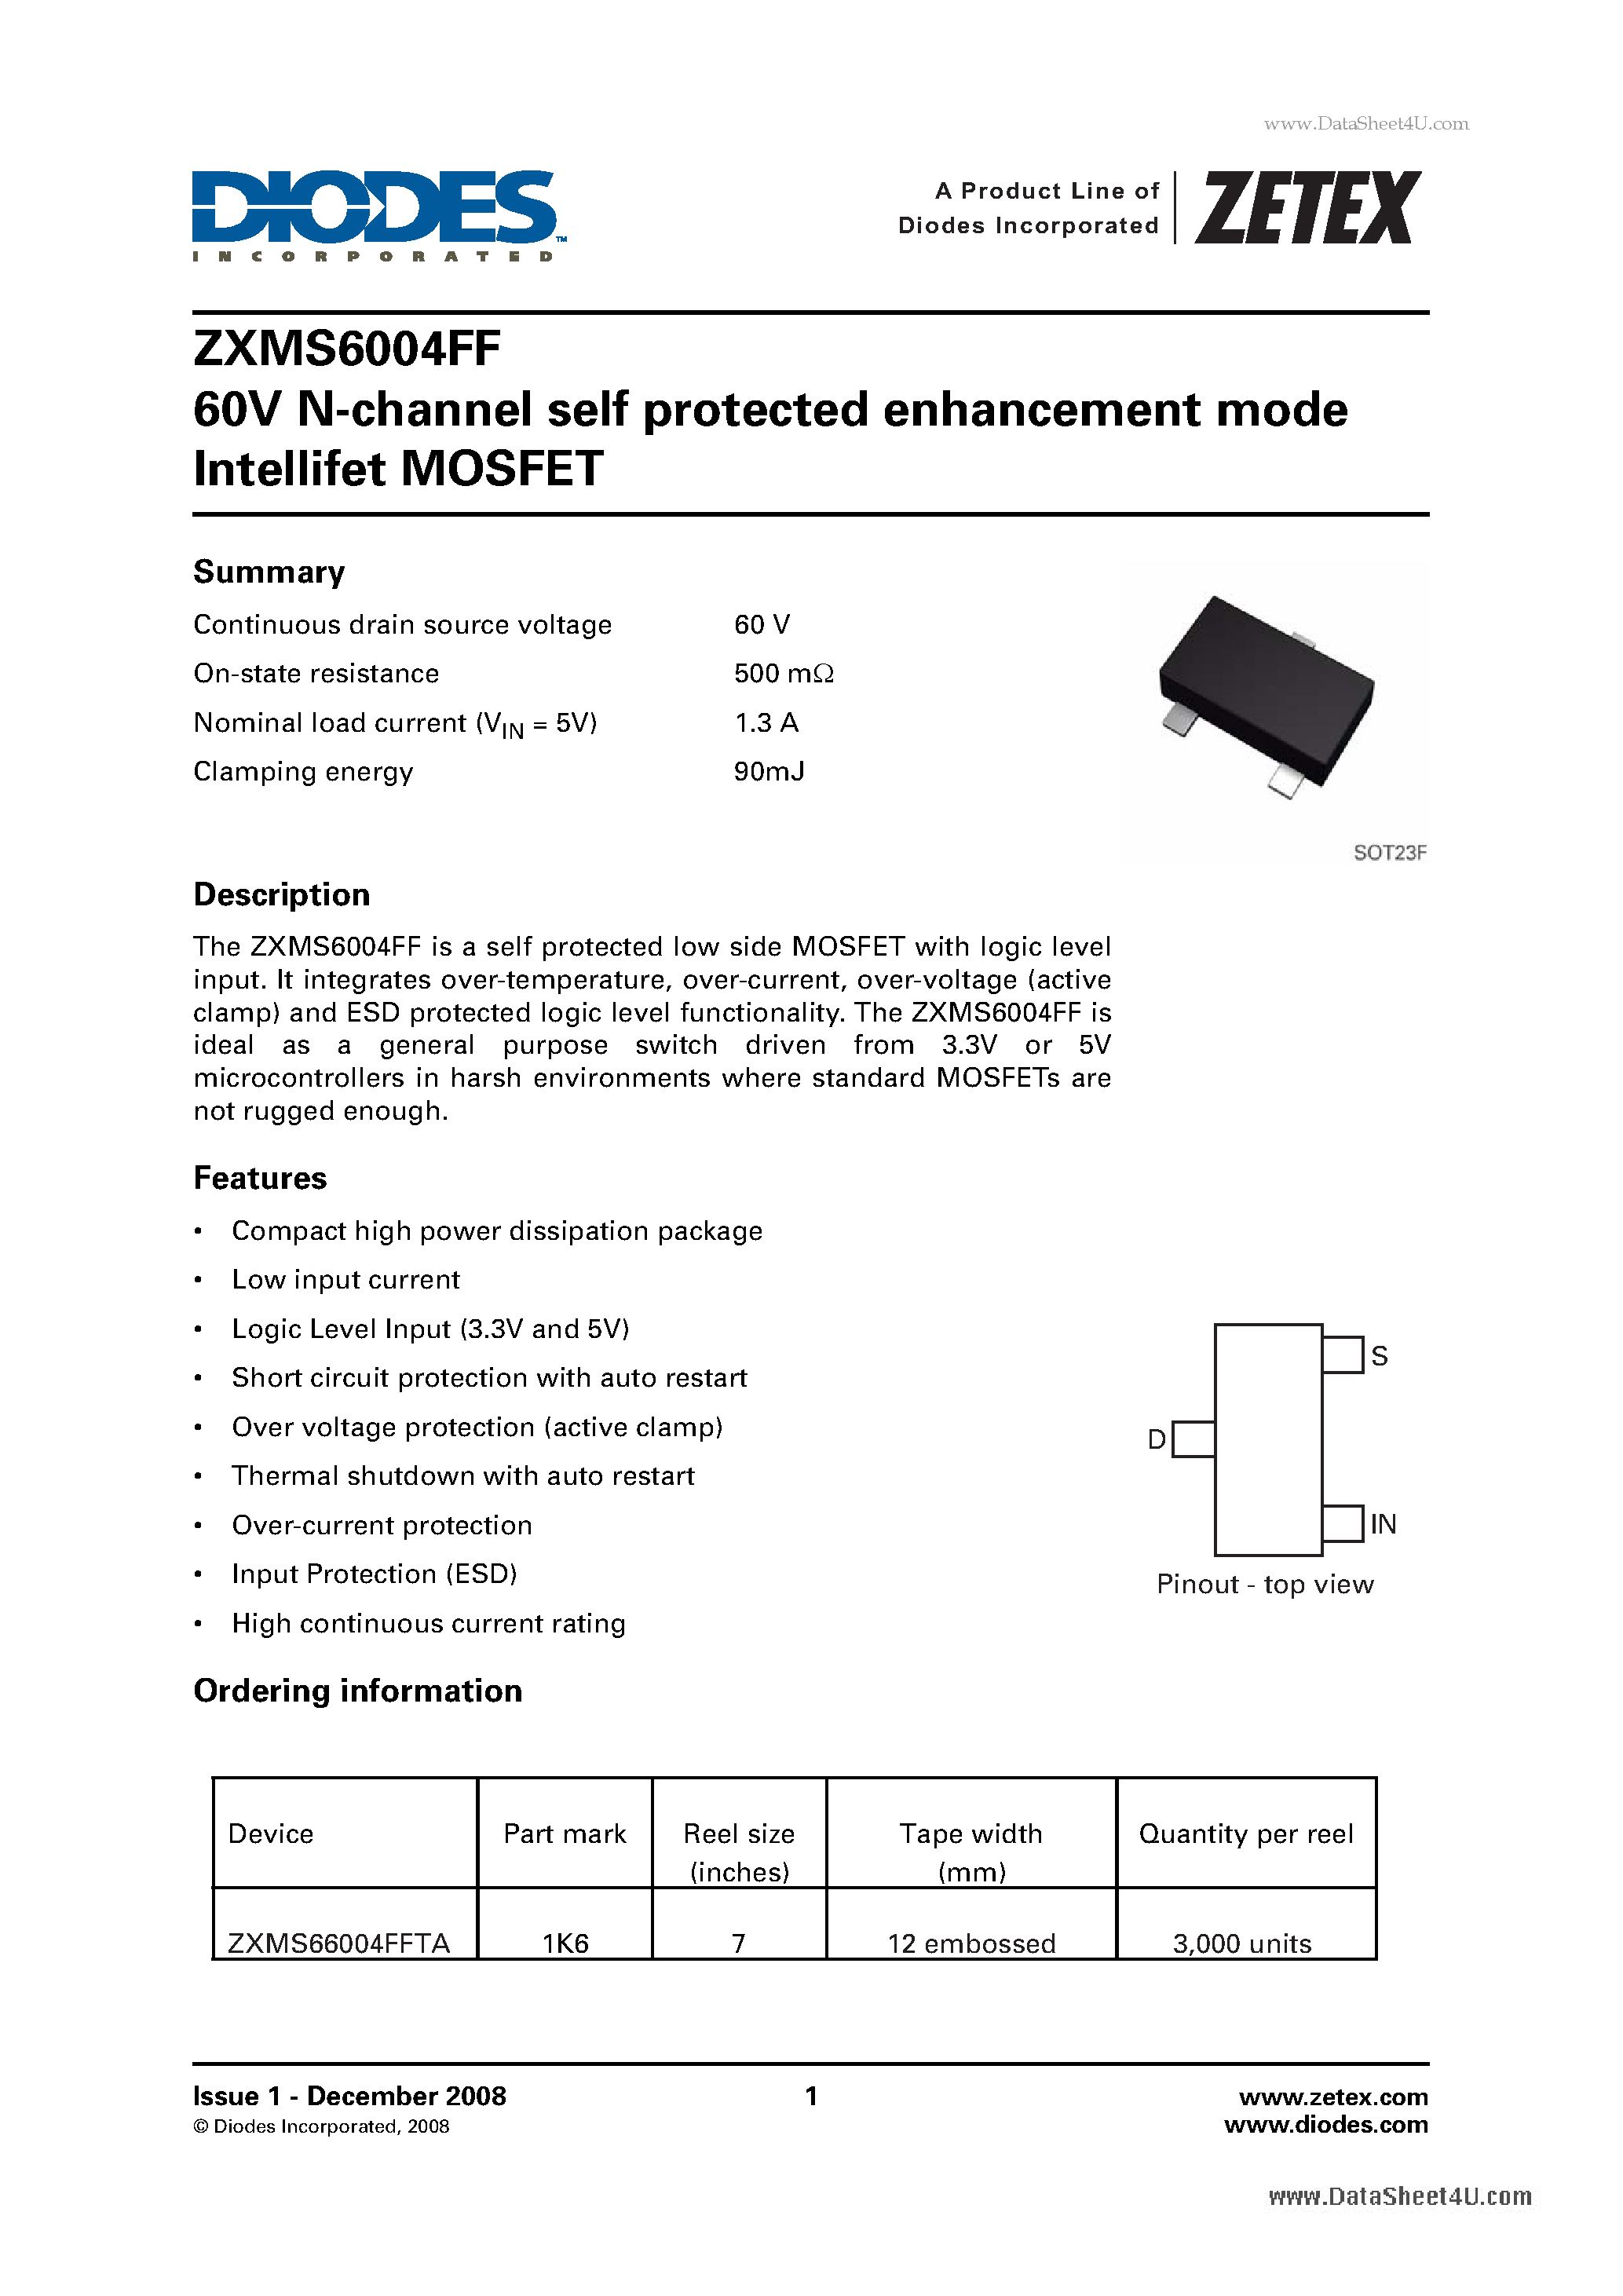 Даташит ZXMS6004FF - 60V N-channel self protected enhancement mode Intellifet MOSFET страница 1